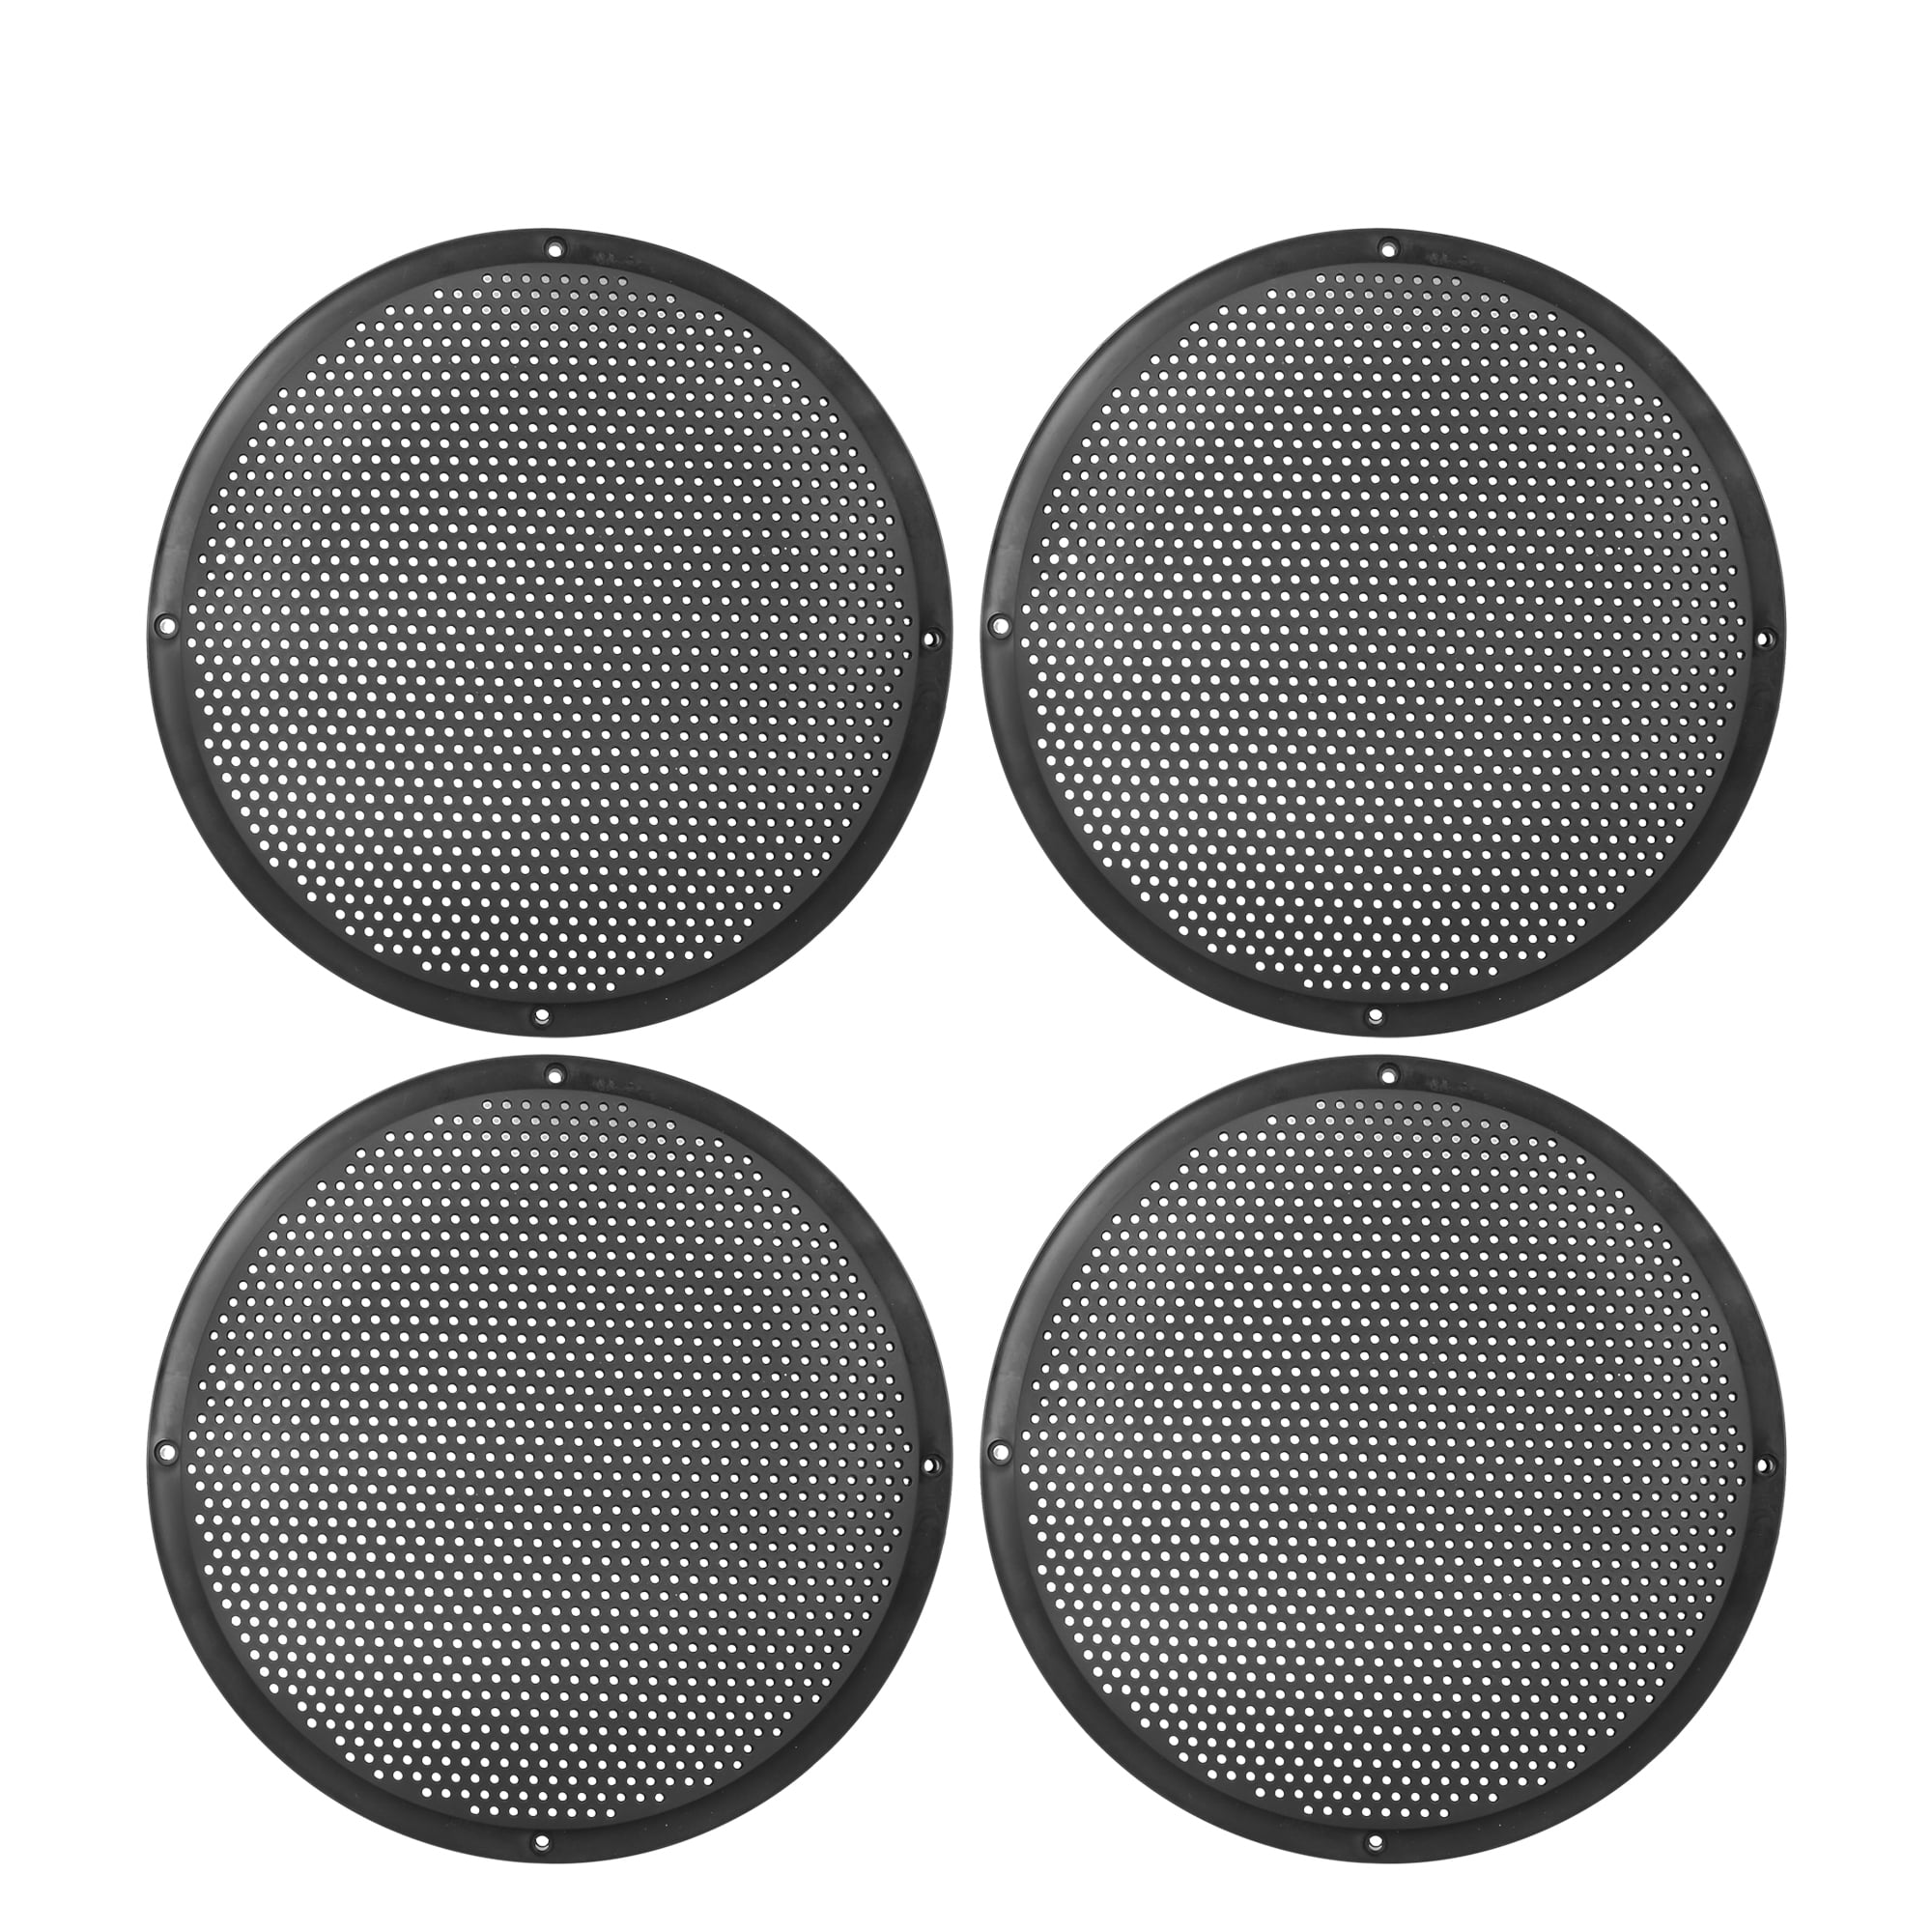 uxcell® 2pcs 10 Speaker Grill Mesh Decorative Circle Subwoofer Guard Protector Cover Audio Accessories